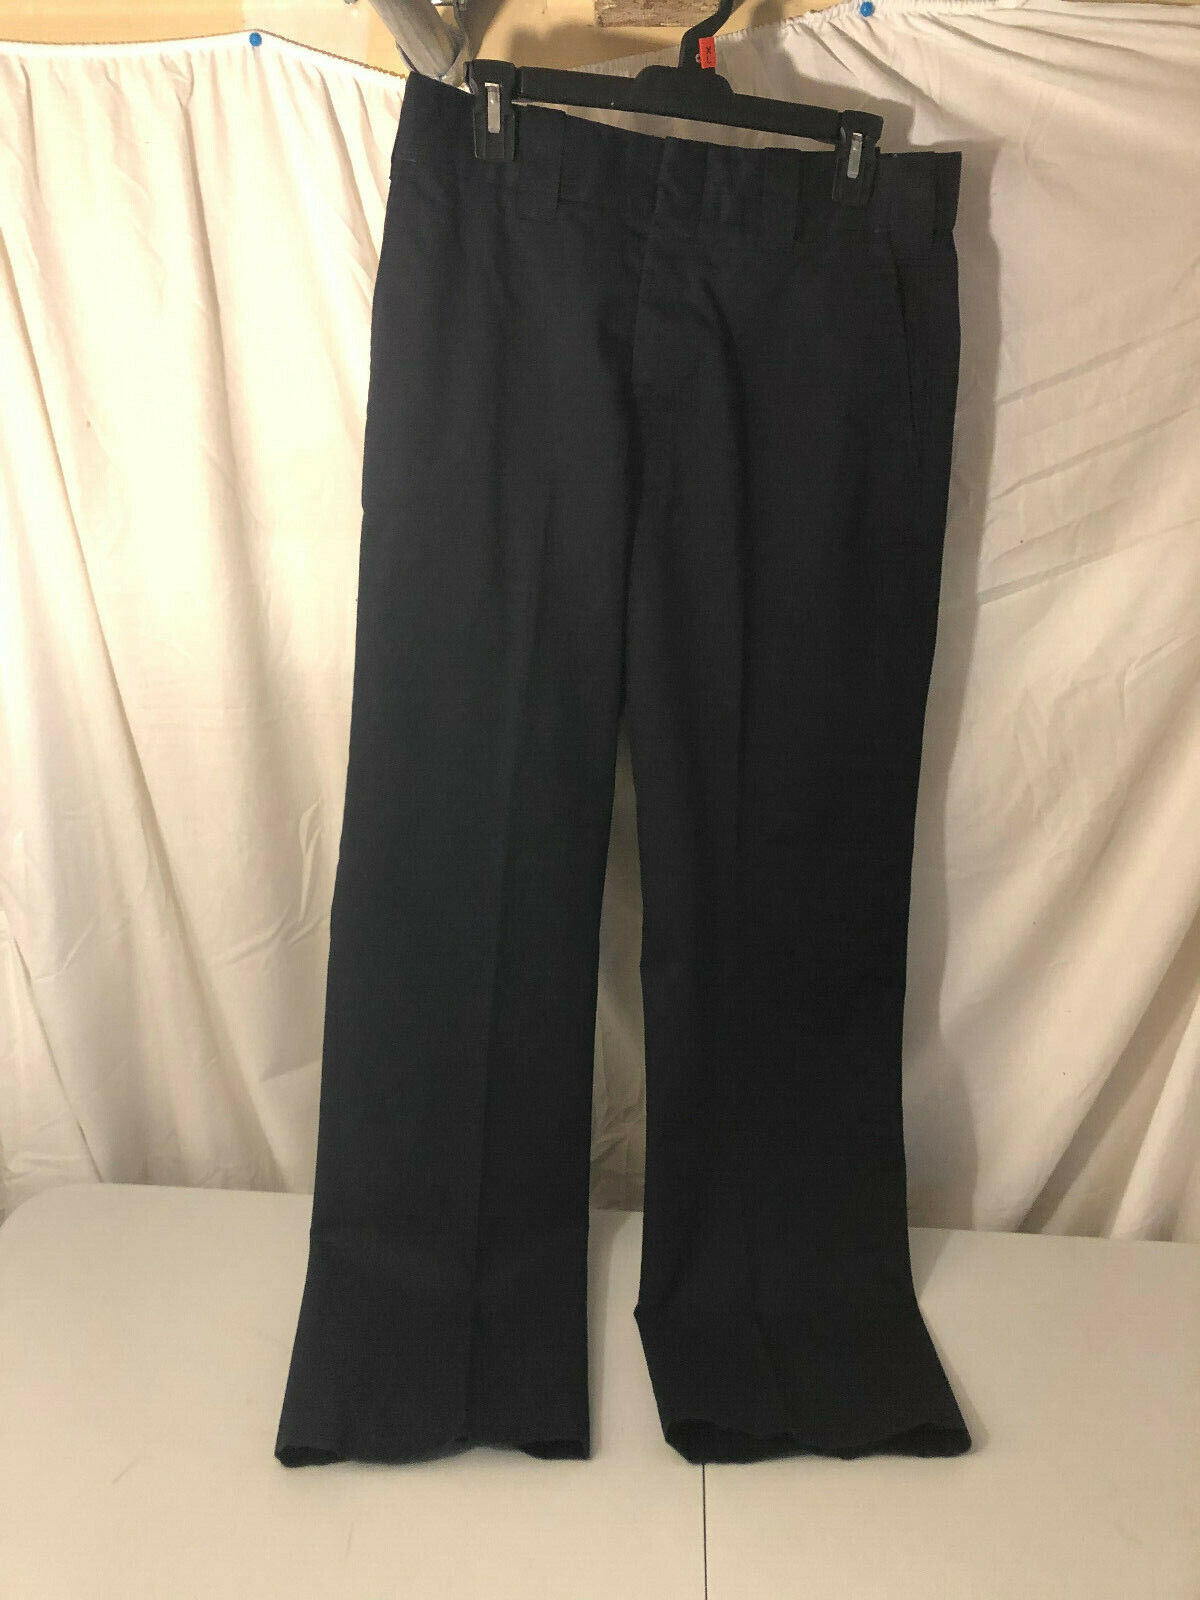 Primary image for Pre- owned Military Style Flying Cross Dress Pants Black style #47400 32 regular